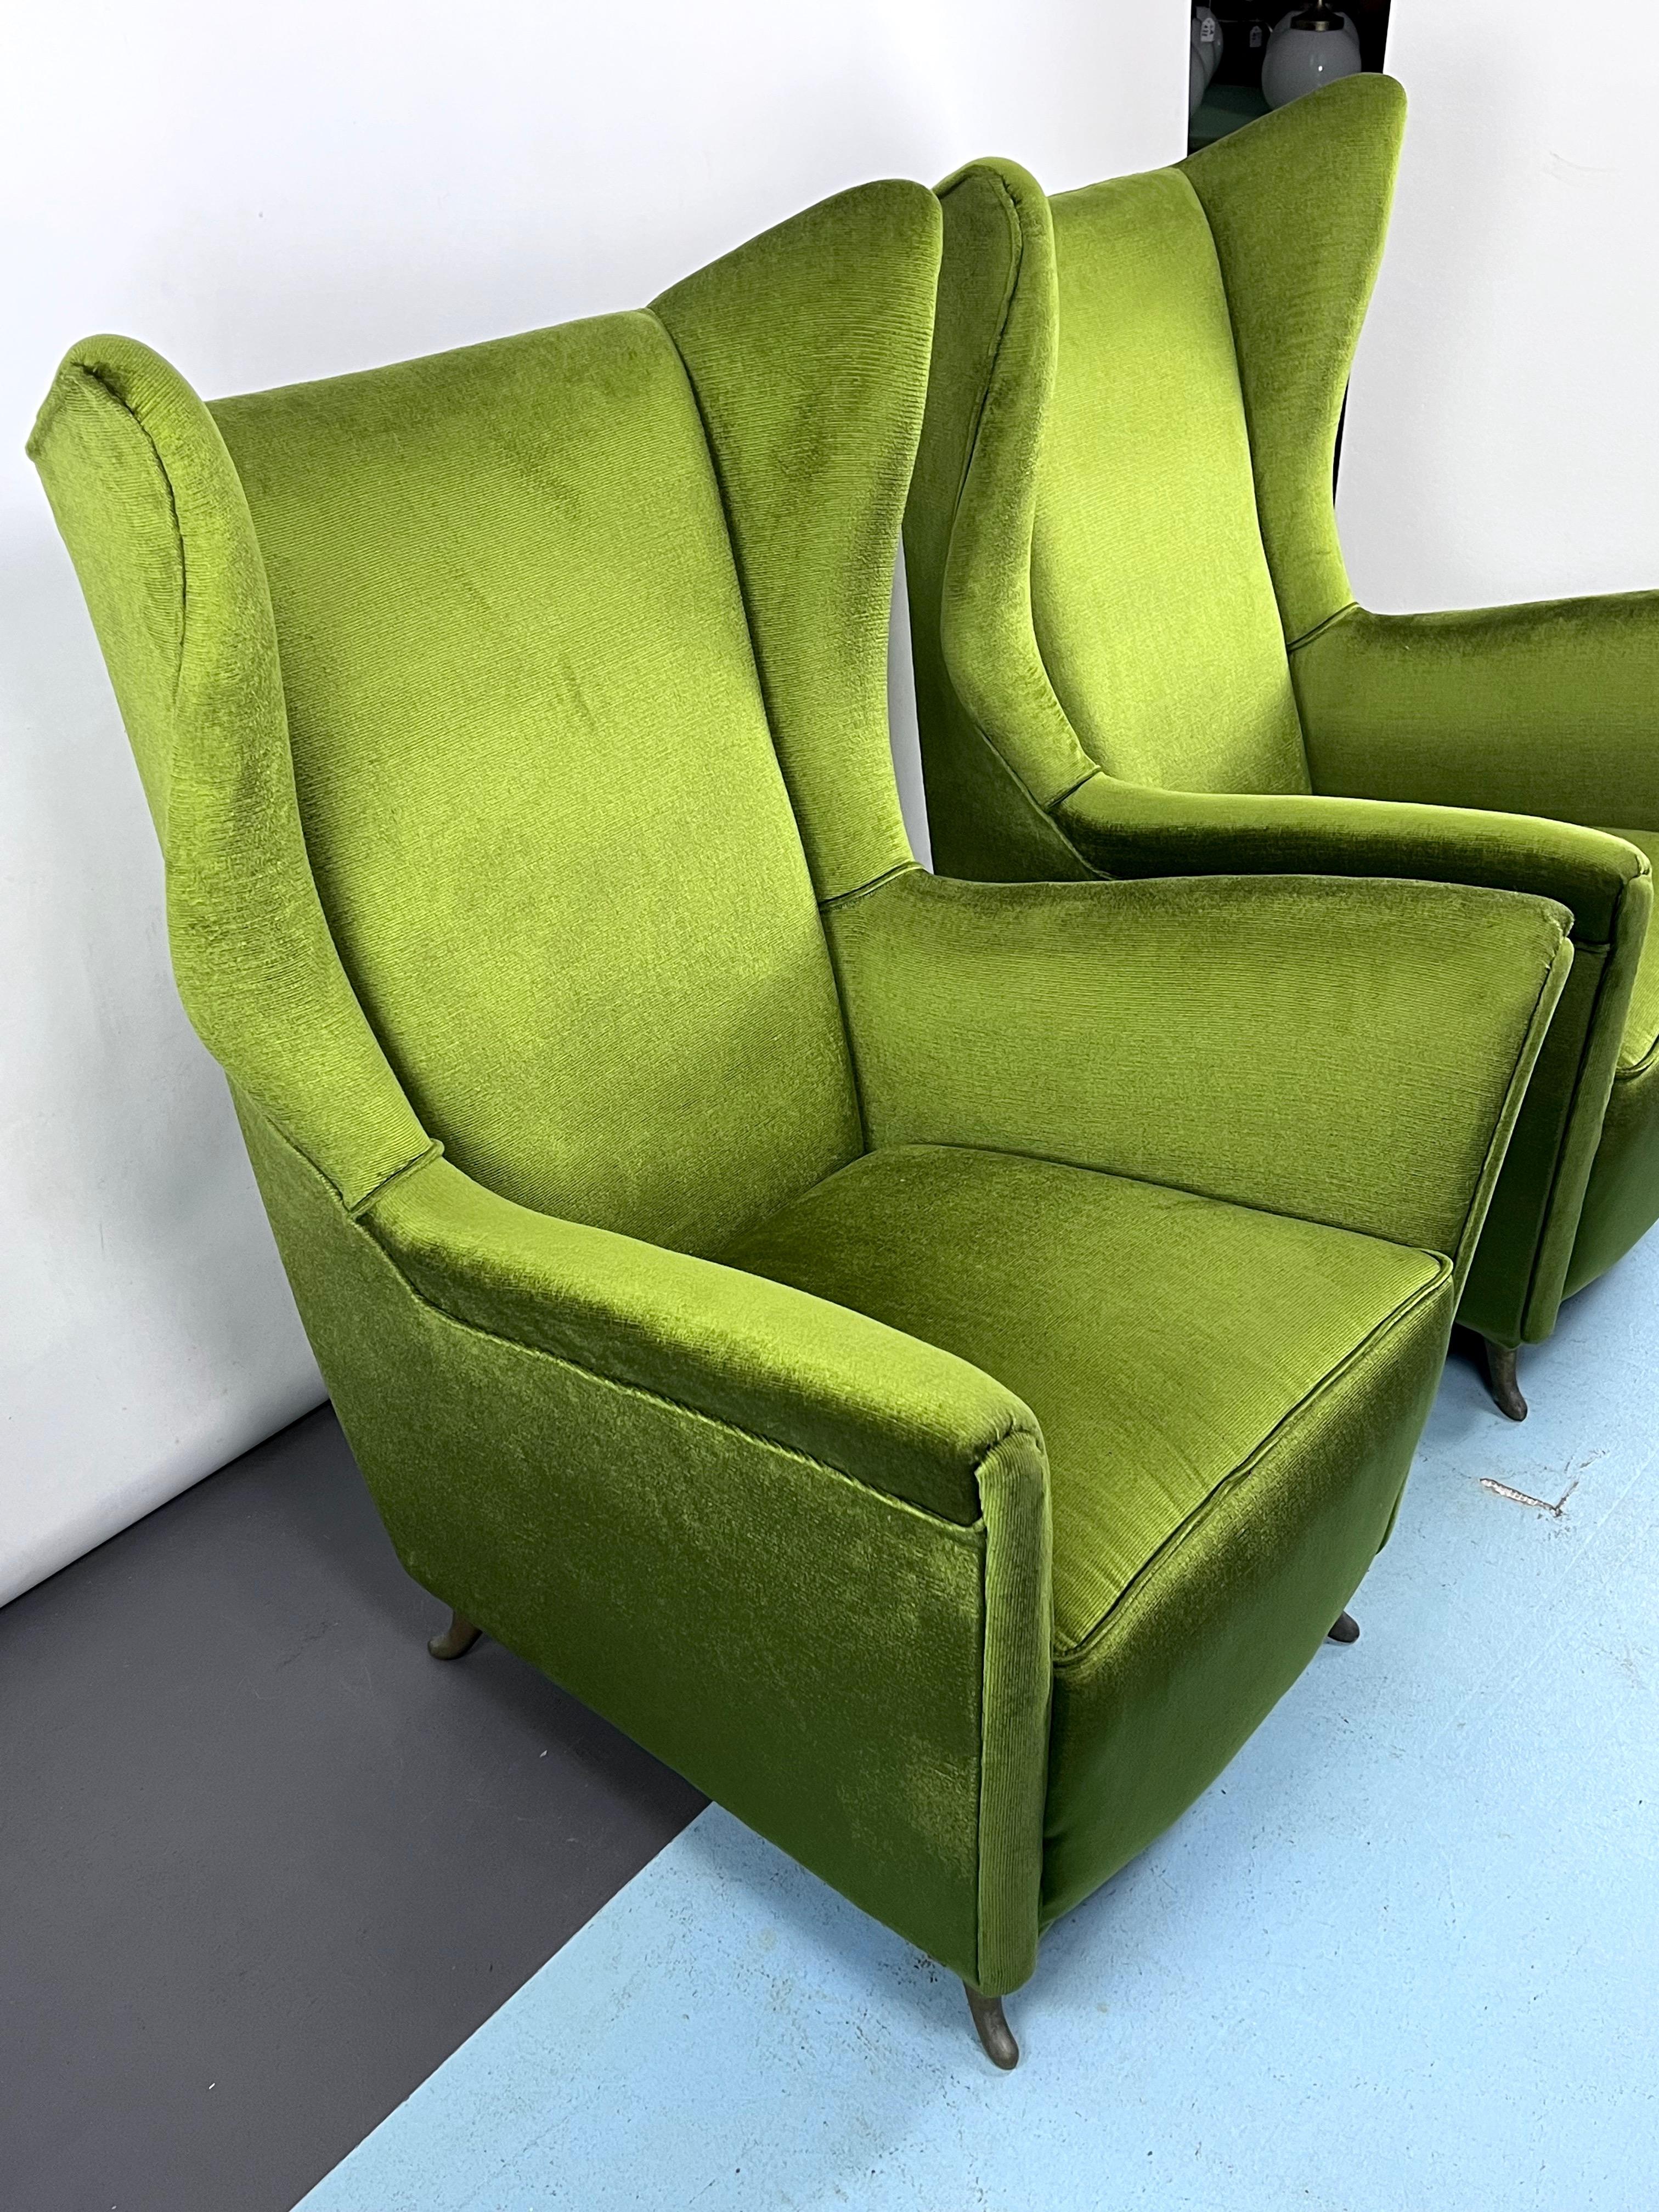 Rare Midcentury Italian Green Velvet ISA Armchairs Attributable to Gio Ponti In Good Condition For Sale In Catania, CT